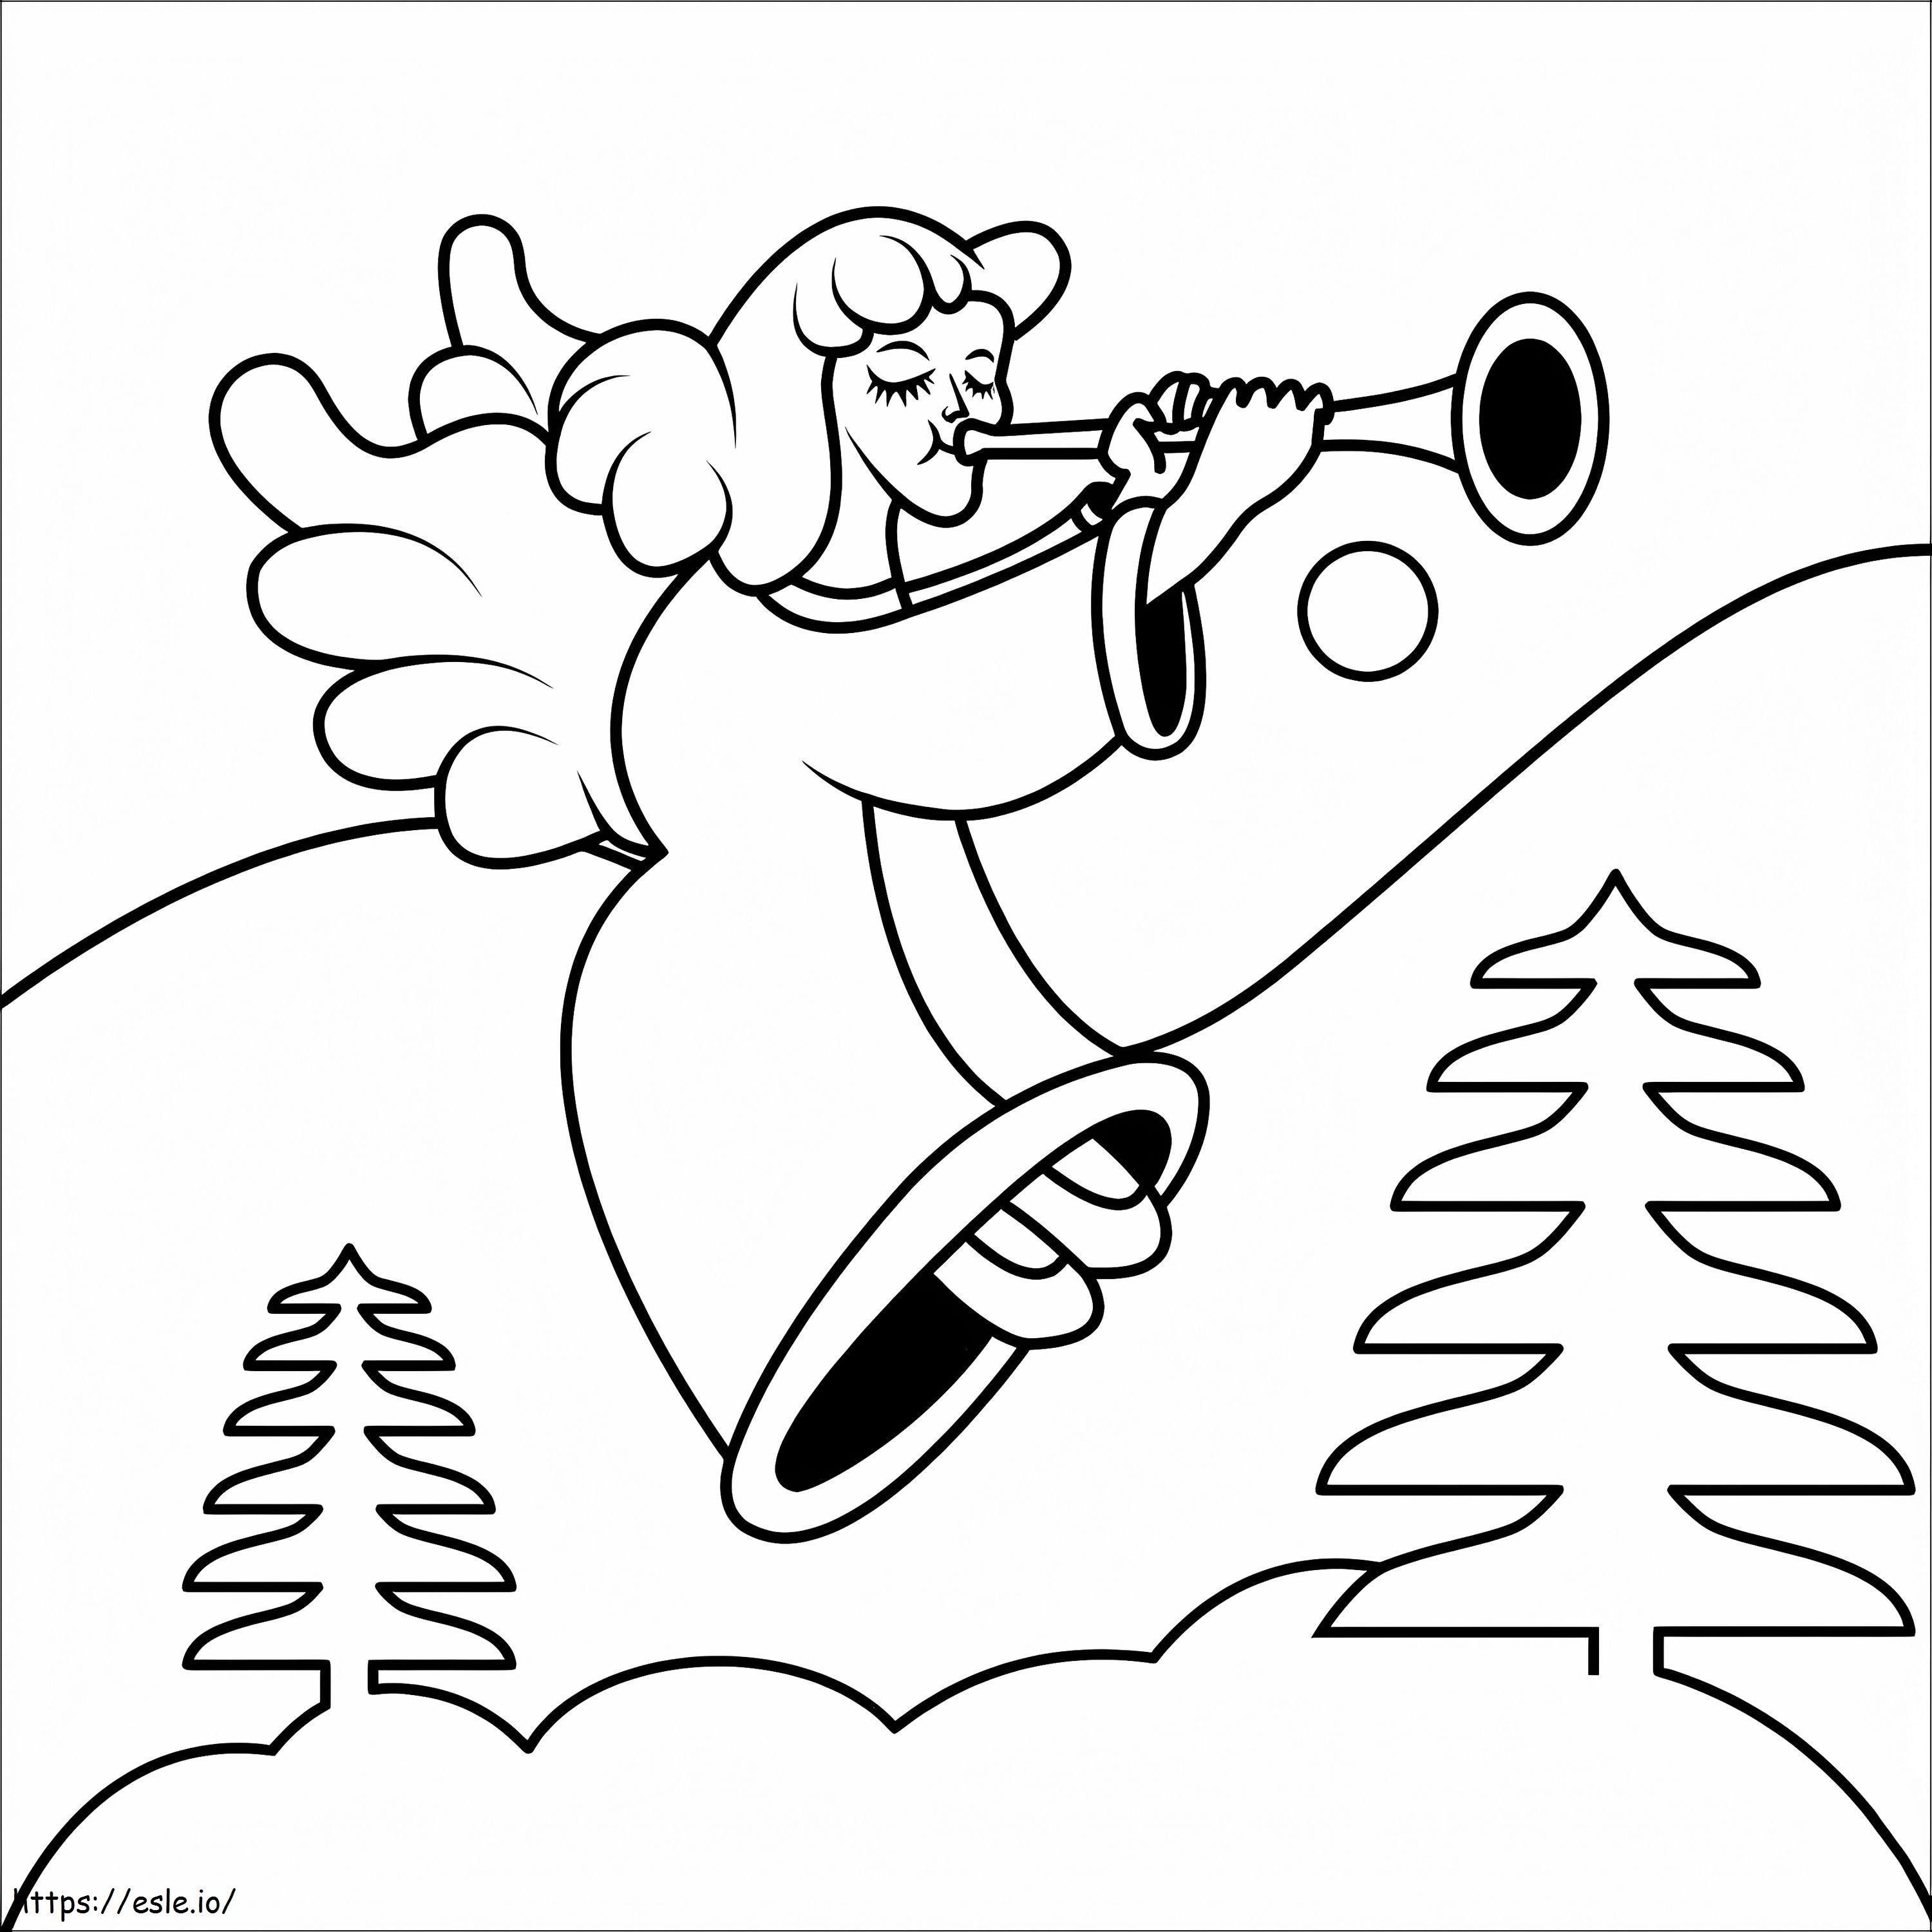 Cool Christmas Angel coloring page